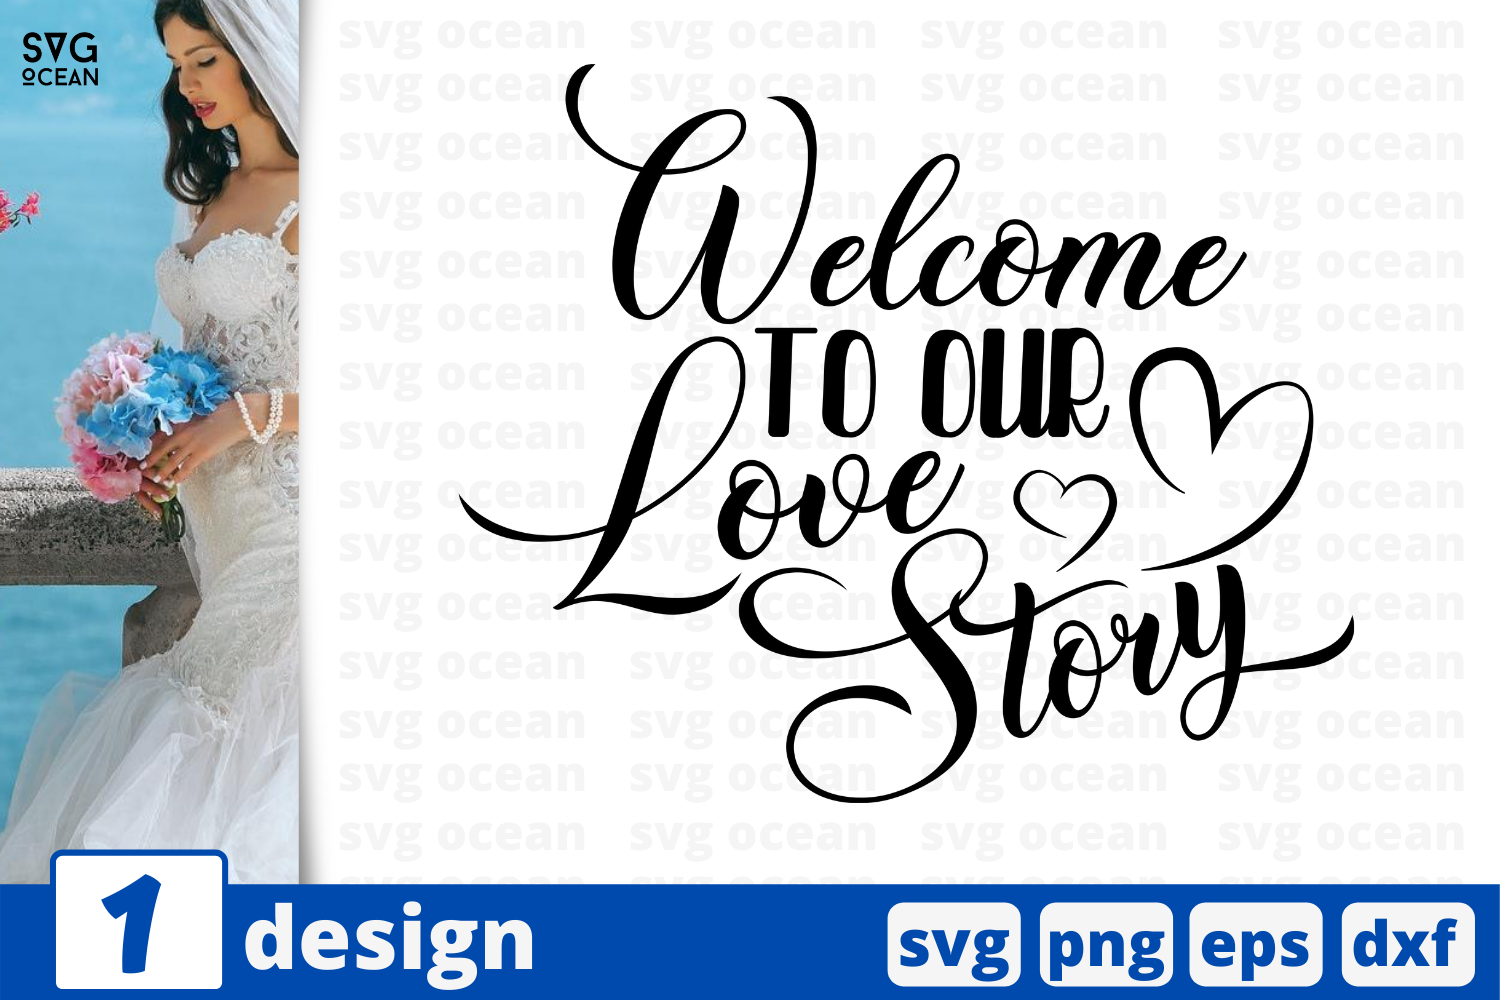 1 Welcome To Our Story Wedding Quotes Cricut Svg By Svgocean Thehungryjpeg Com